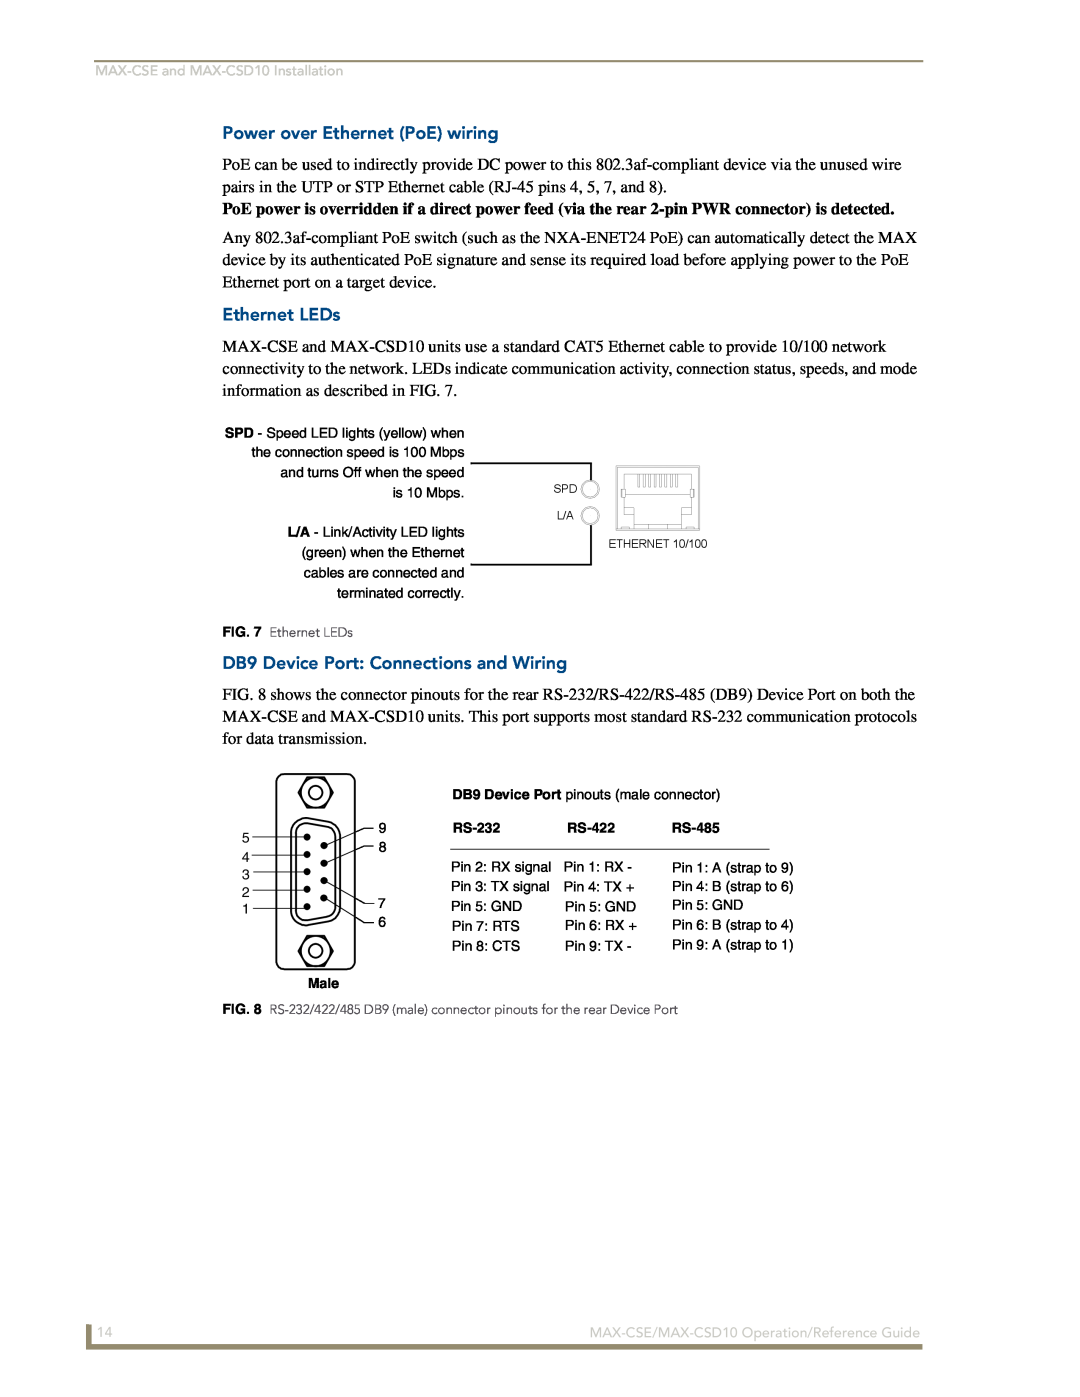 AMX MAX-CSE Power over Ethernet PoE wiring, Ethernet LEDs, DB9 Device Port: Connections and Wiring, RS-232, RS-422, RS-485 